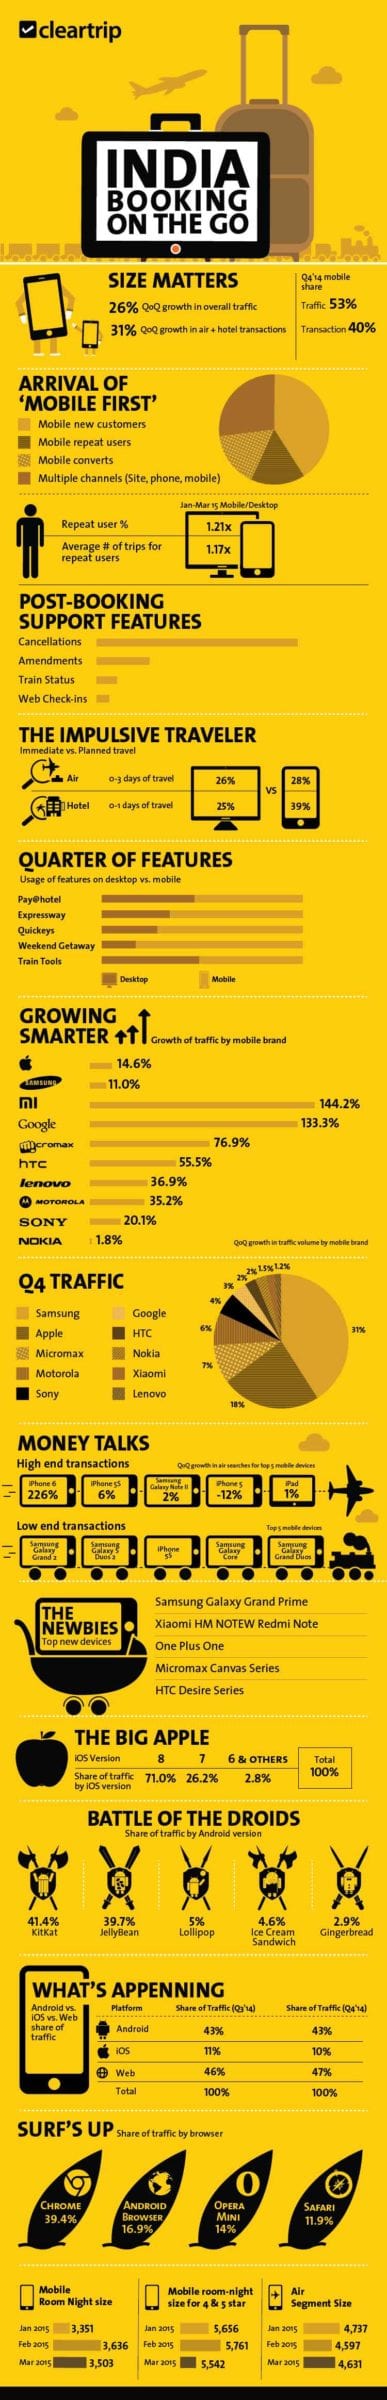 Cleartrip-Quarterly-Mobile-Insights--for-Q4-14Jan-Mar--2015